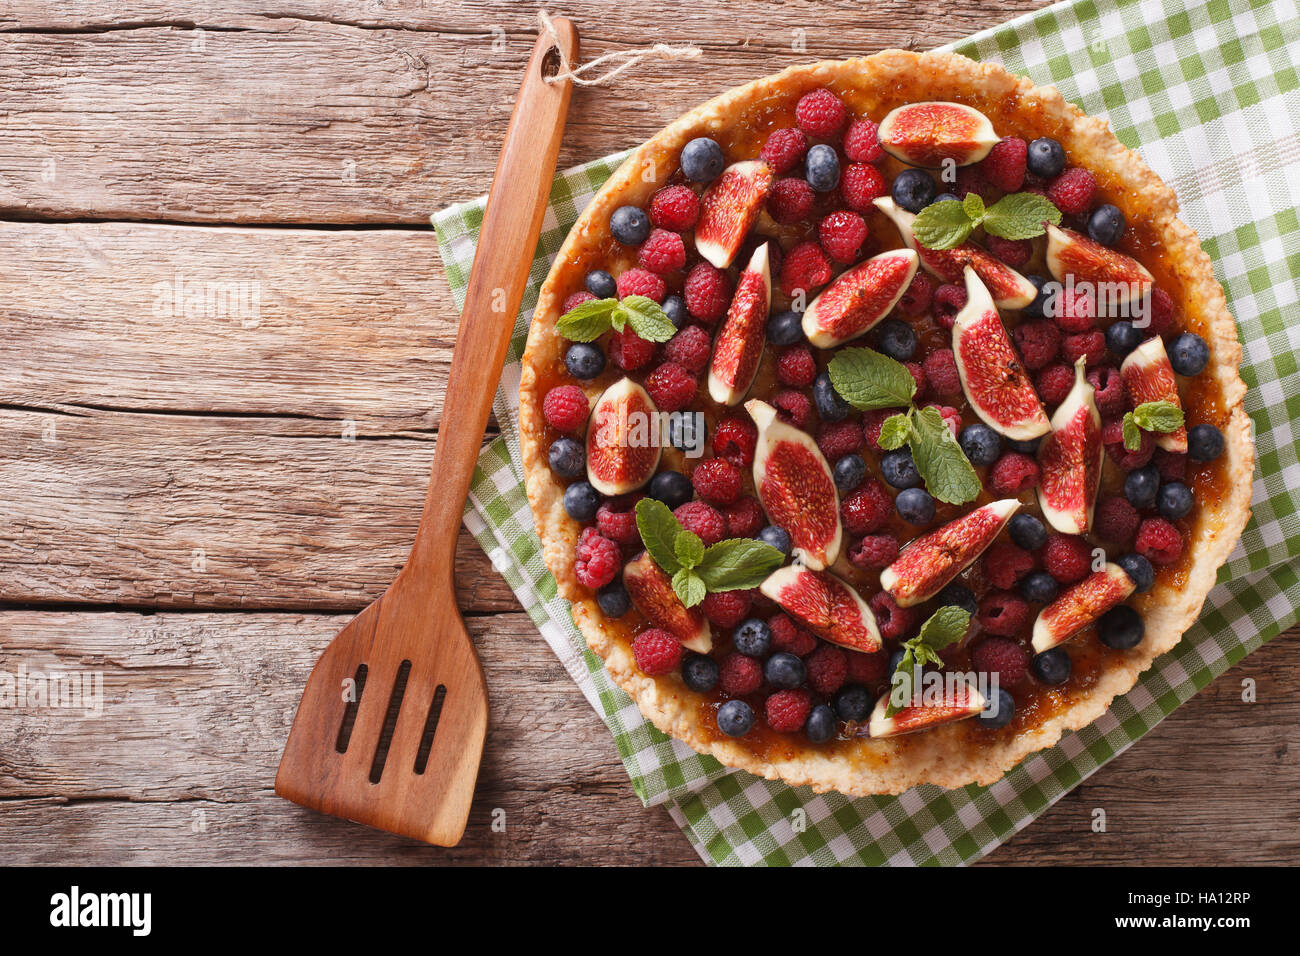 Freshly baked cake with fresh figs, raspberries and blueberries on the table. Horizontal view from above Stock Photo